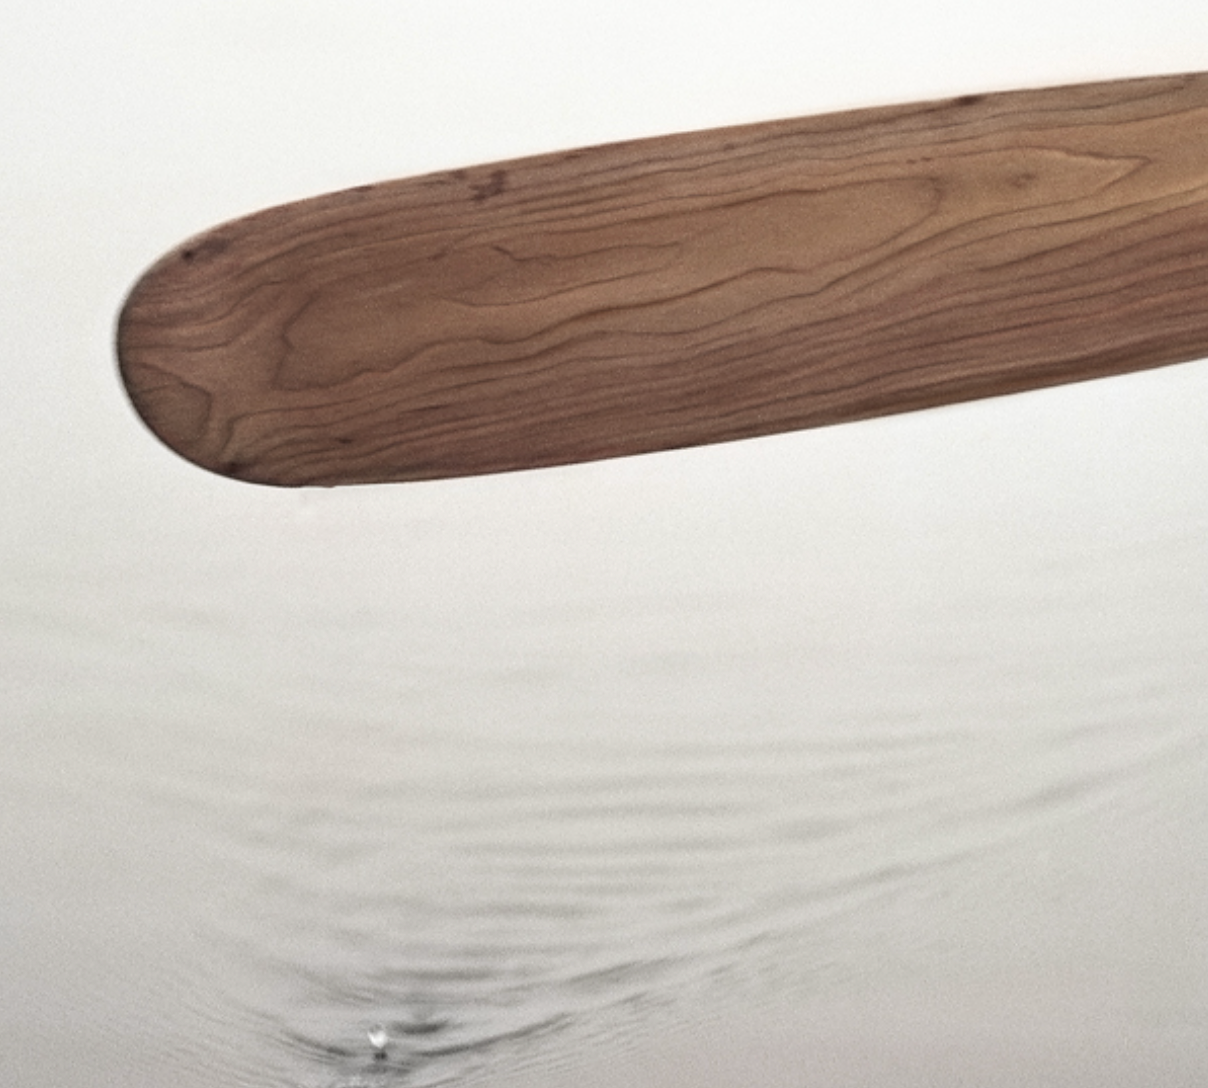 The Paddle Wall Art